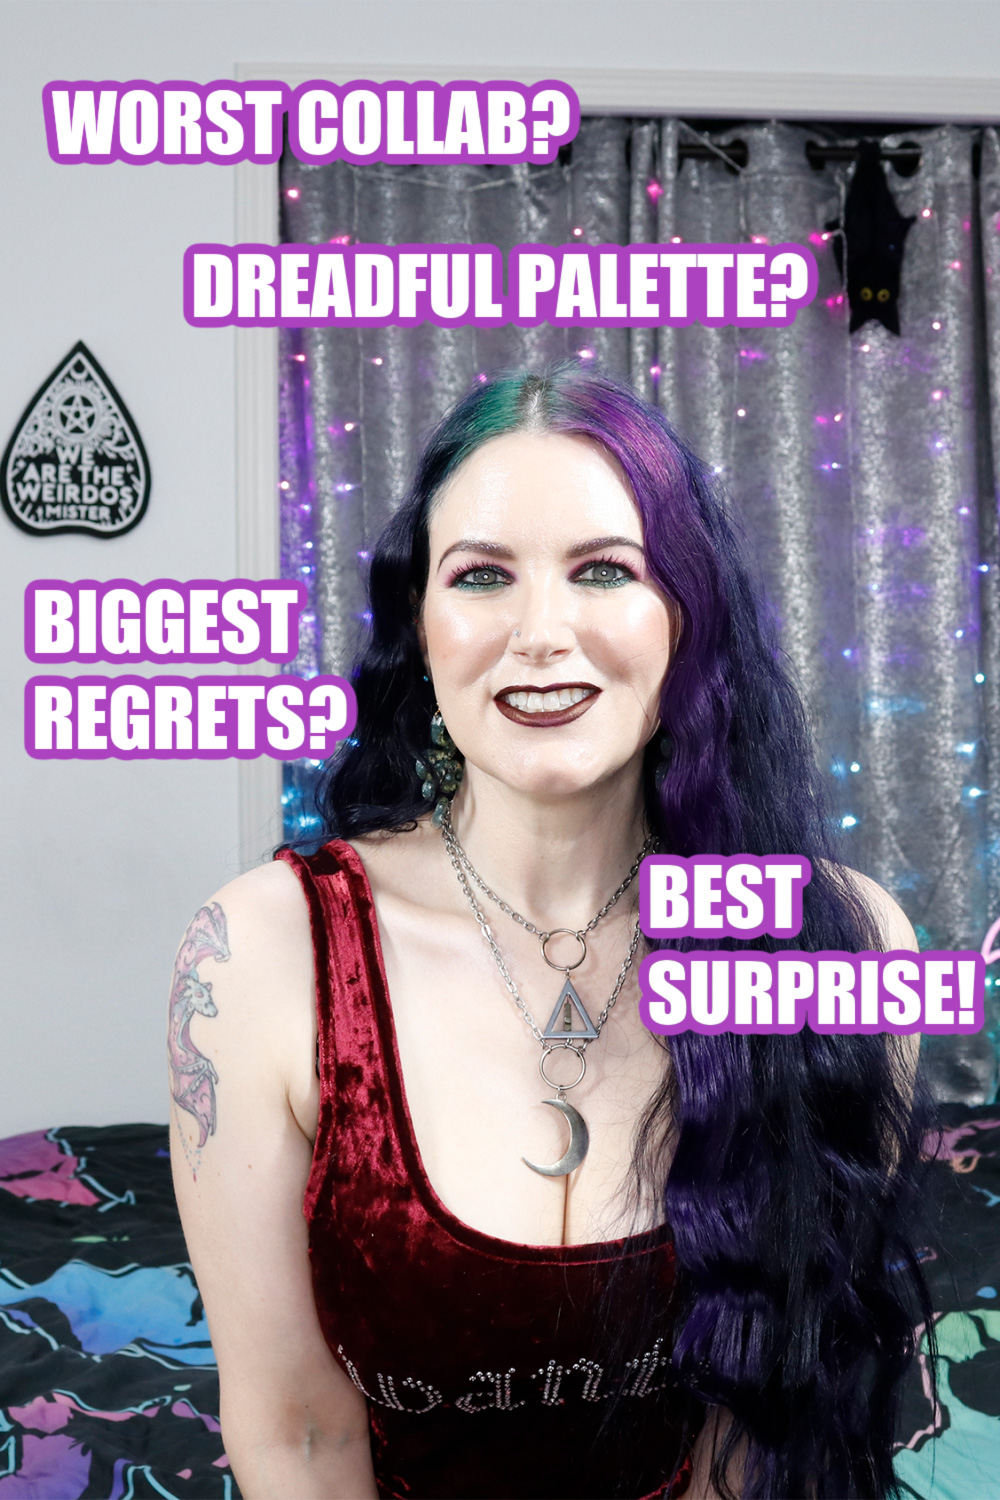 2022 Eyeshadow Palette Tag: Worst Collab? Biggest Regrets? Small or Big?